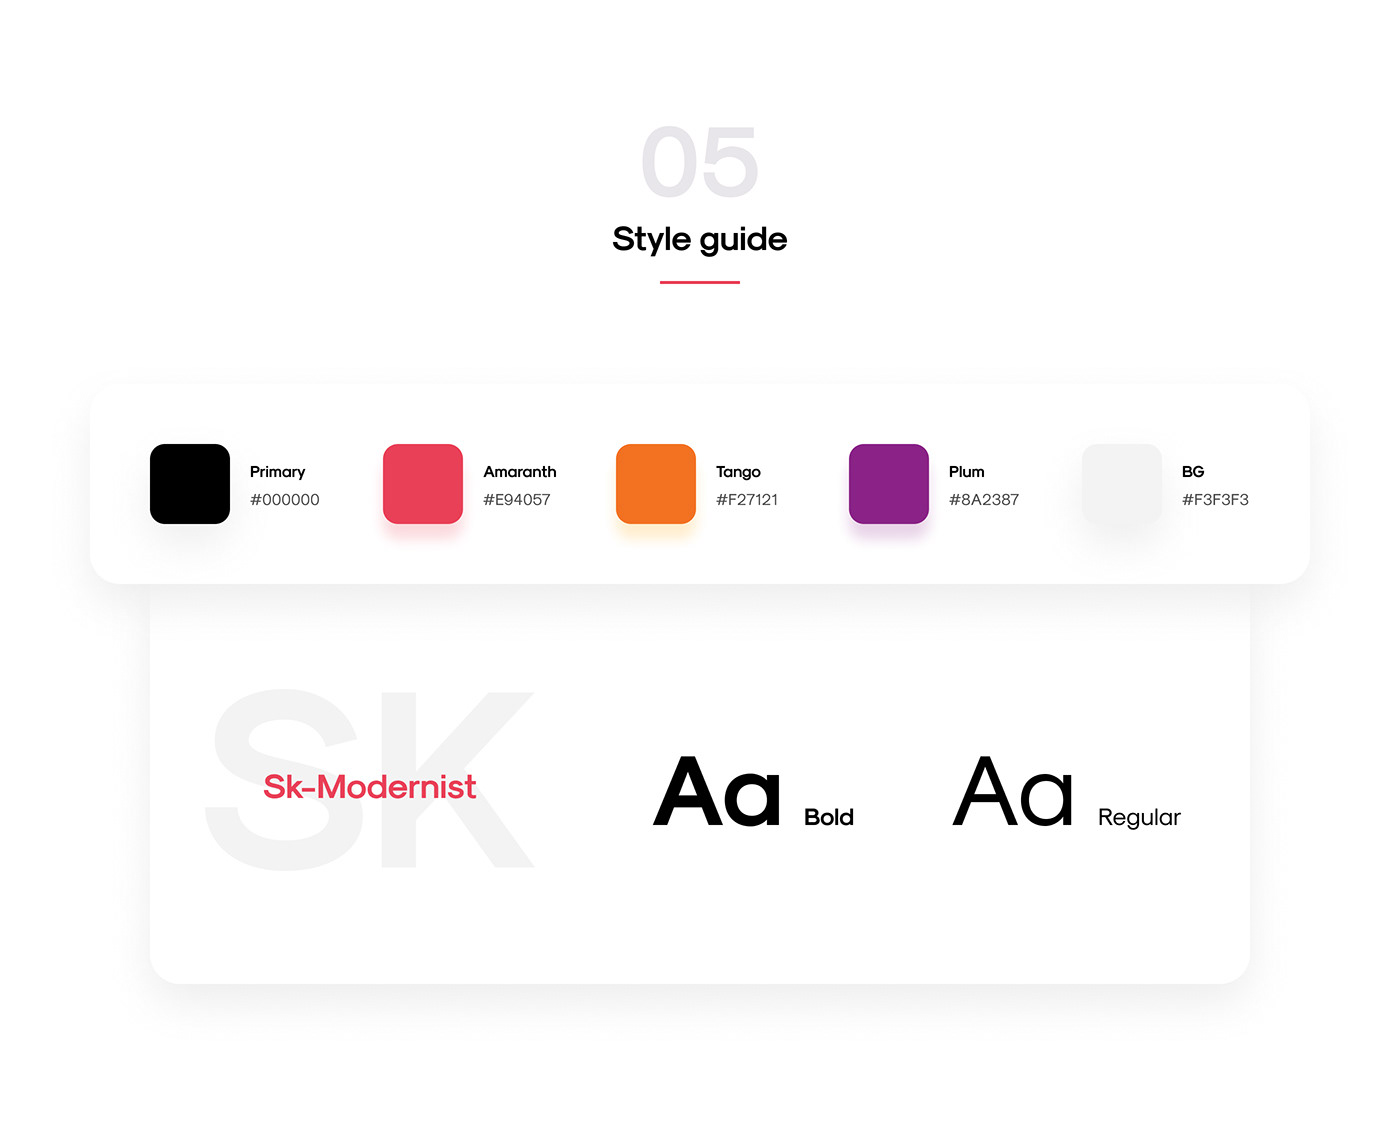 Style guide of the project